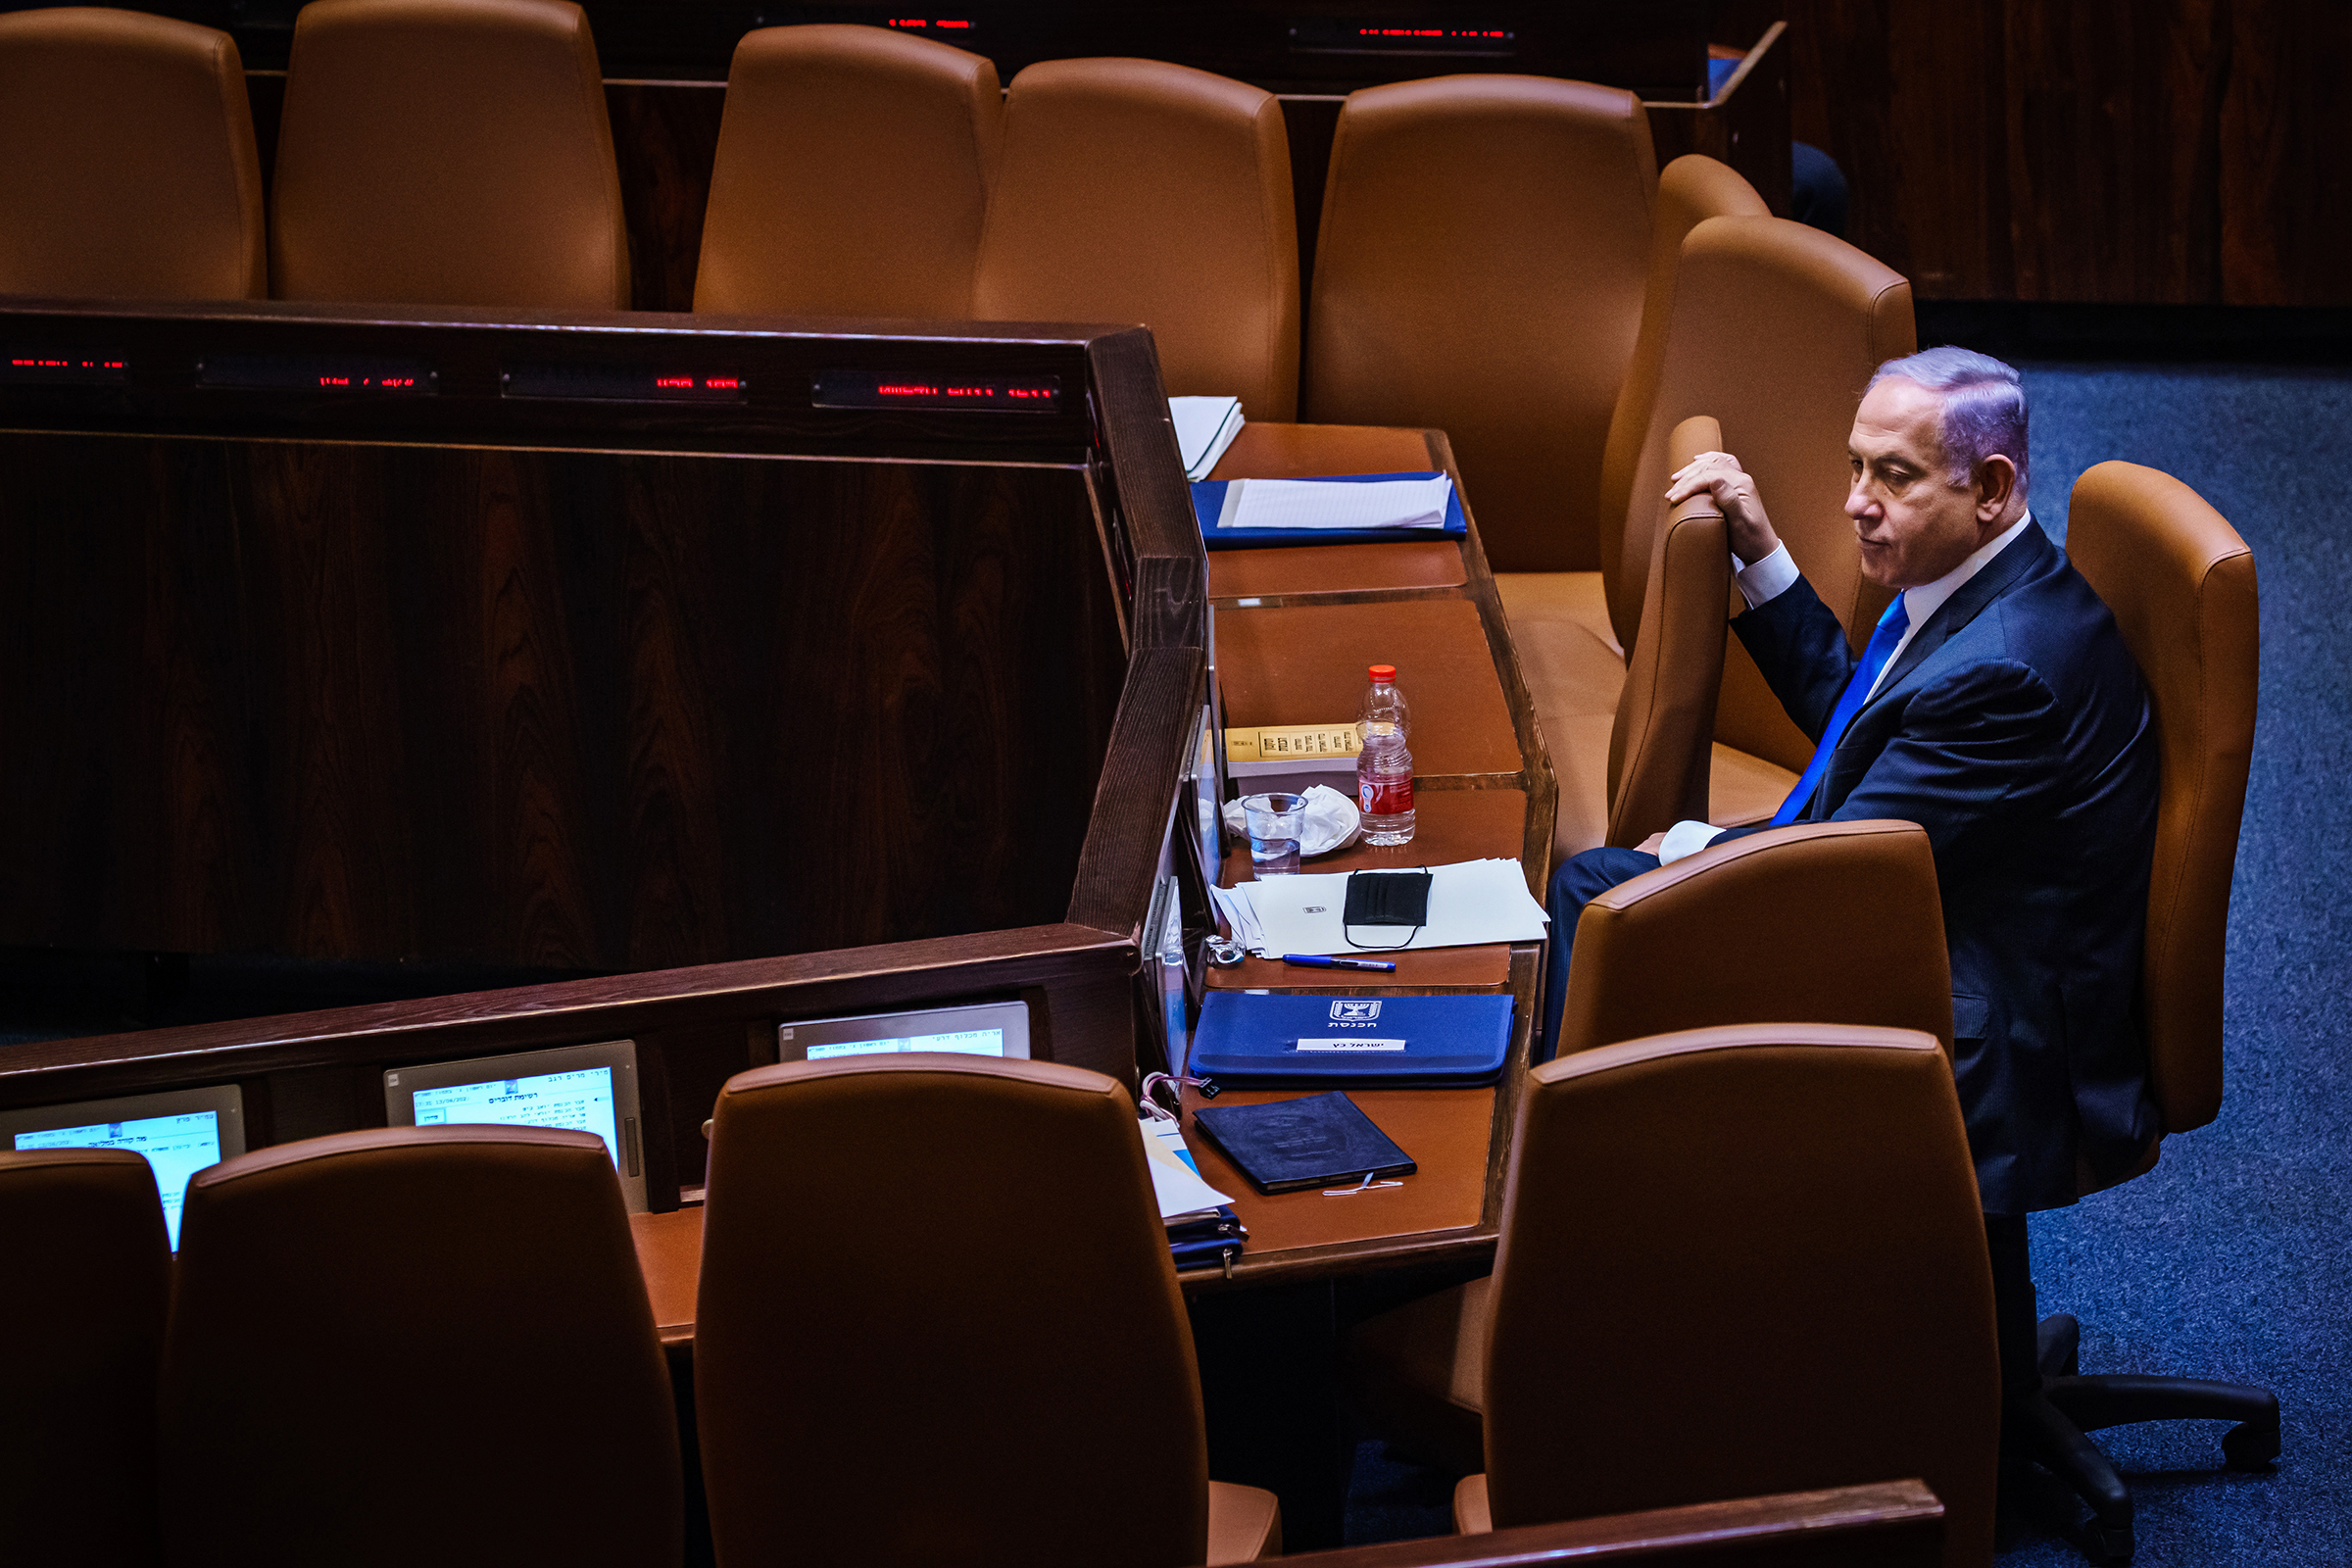 Benjamin Netanyahu takes a look around the empty seats as members of the Knesset, Israel's Parliament, step out for a break in Jerusalem on June 13 before returning to cast their vote of confidence to empower the new coalition government and unseat him as the country's longest-serving prime minister.